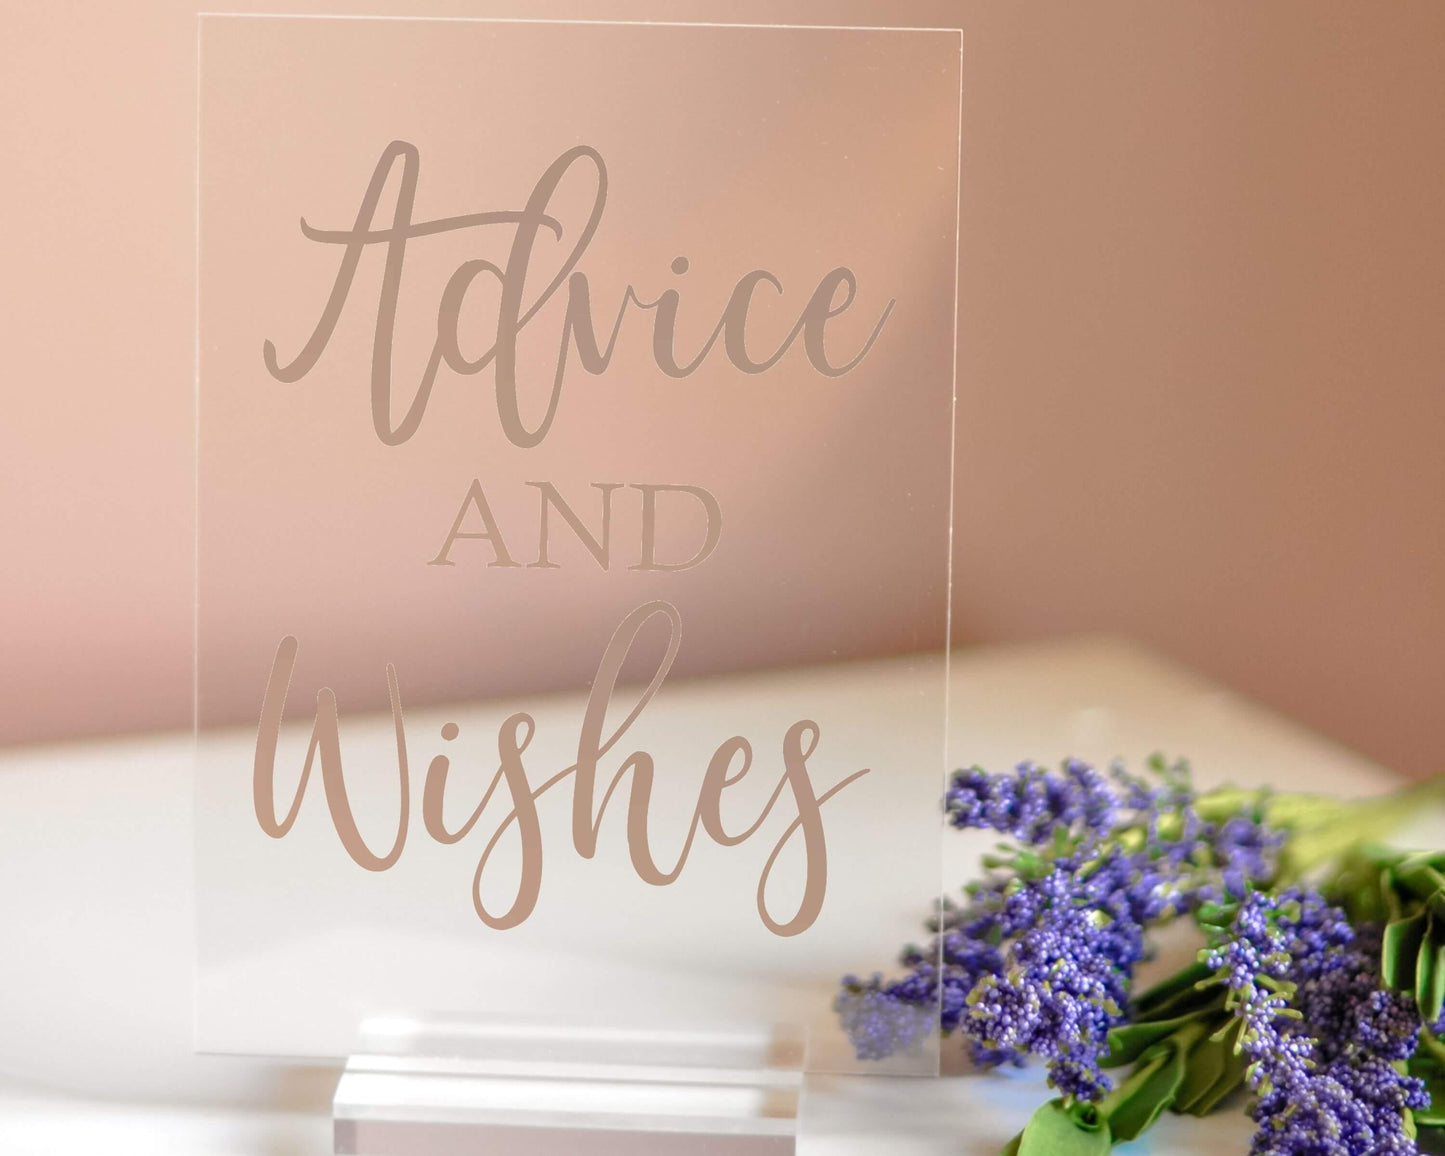 Advice and Wishes Acrylic Sign with Clear Background | 5 X 7"